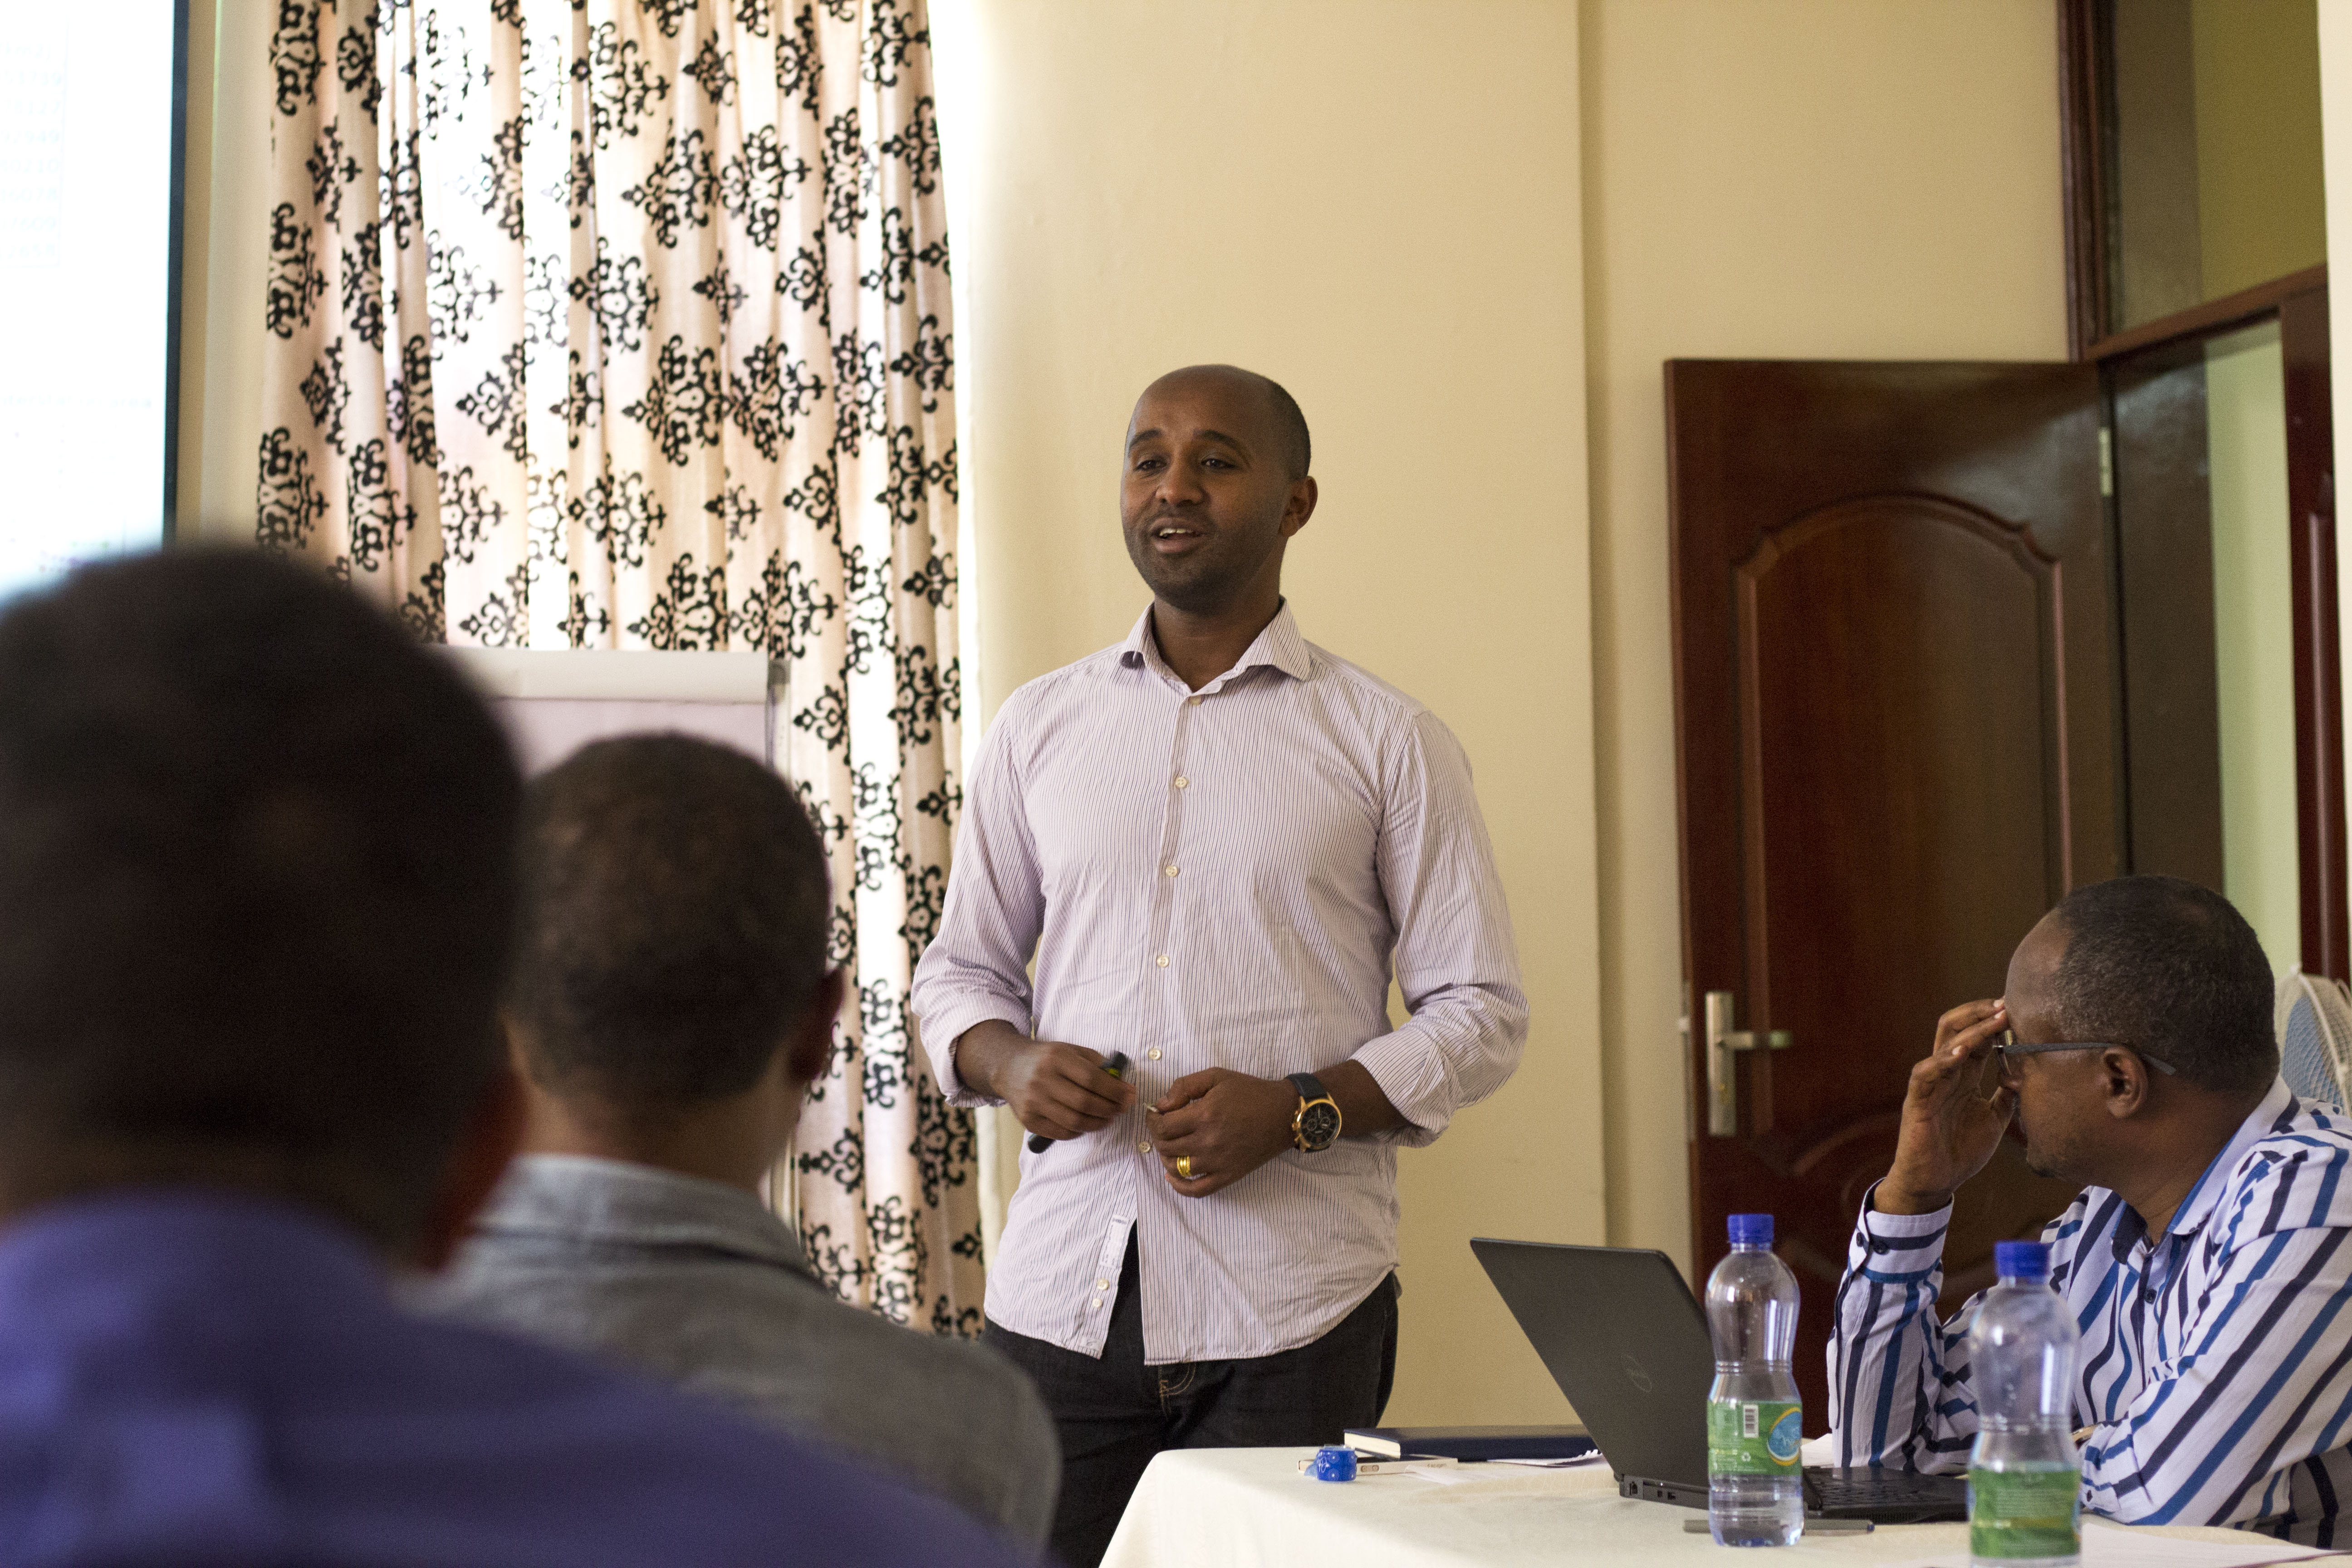 Feyera presenting hydrology research to the Awash Basin Development Office, Ethiopia, November 2018; Credit: Alice Chautard